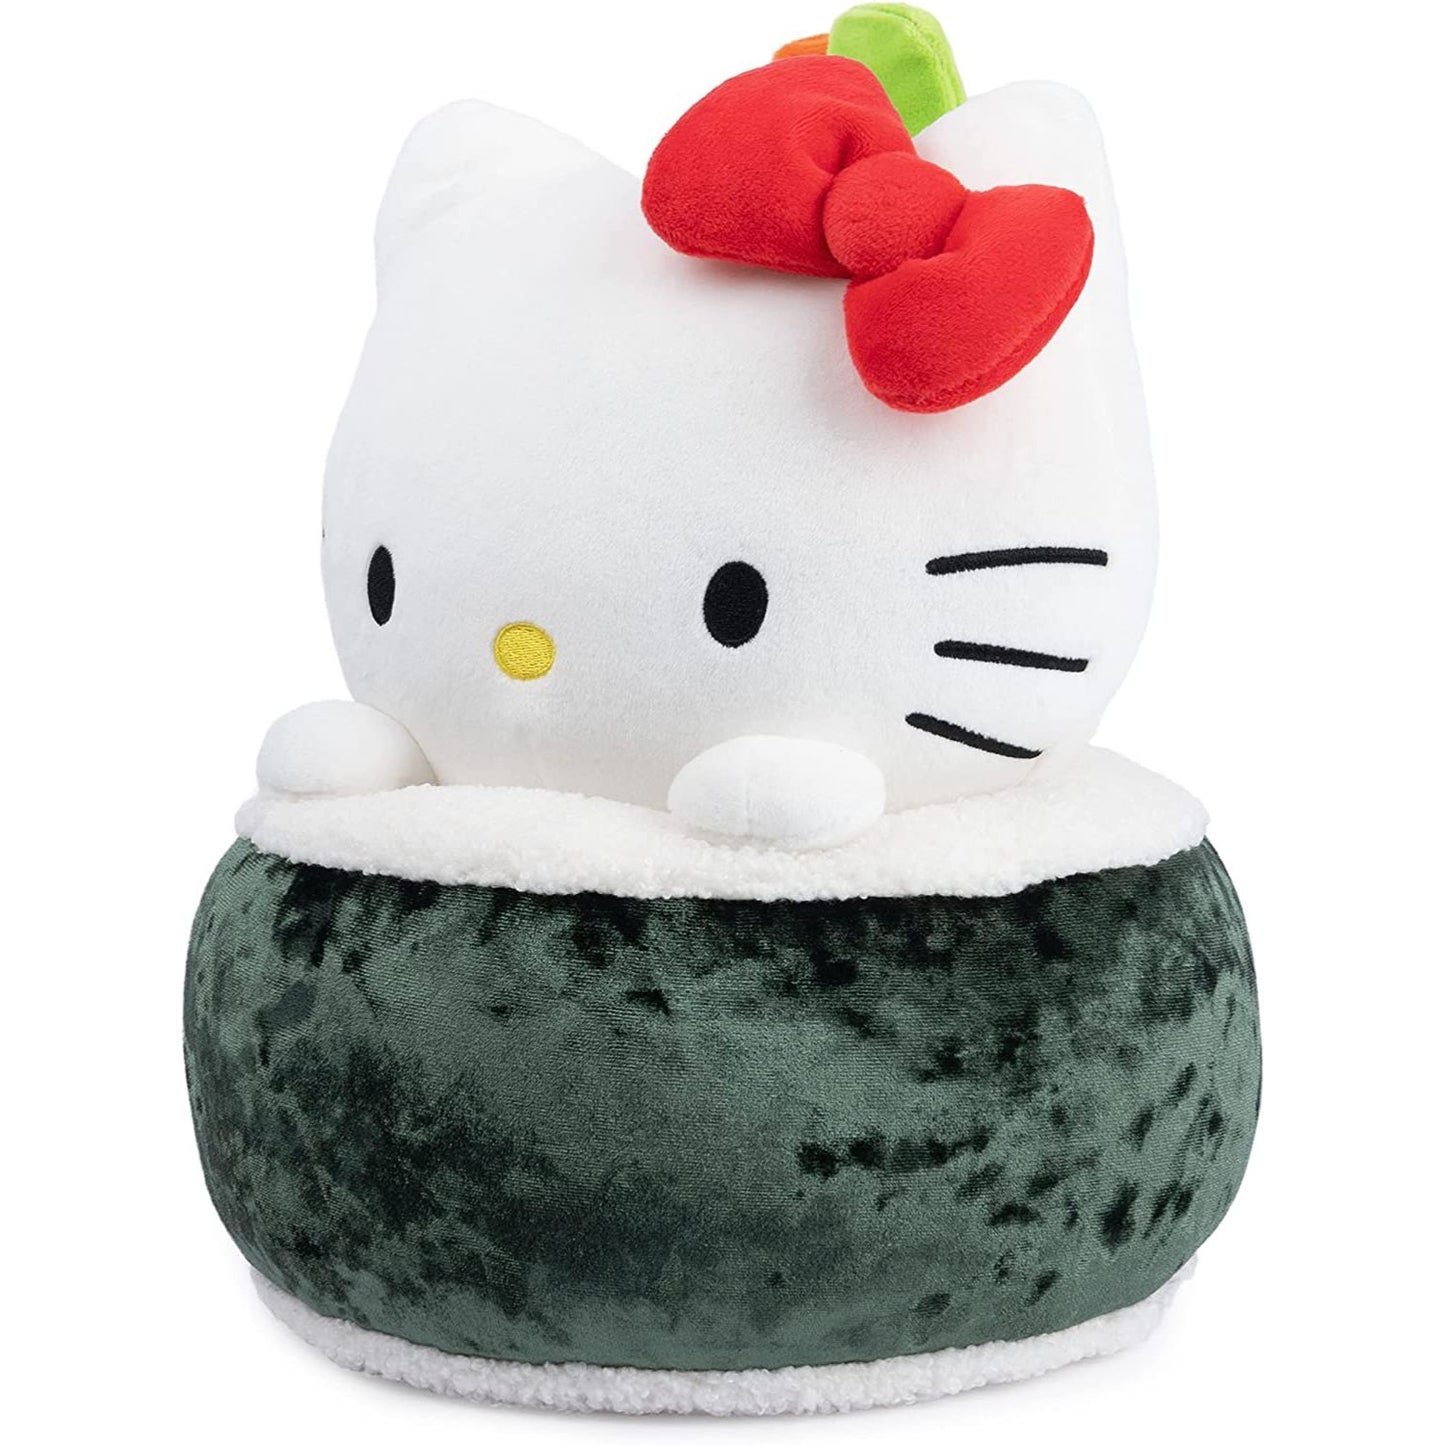 Sanrio Hello Kitty Sushi Plush, Premium Stuffed Animal for Ages 1 and Up, Green/White, 10”